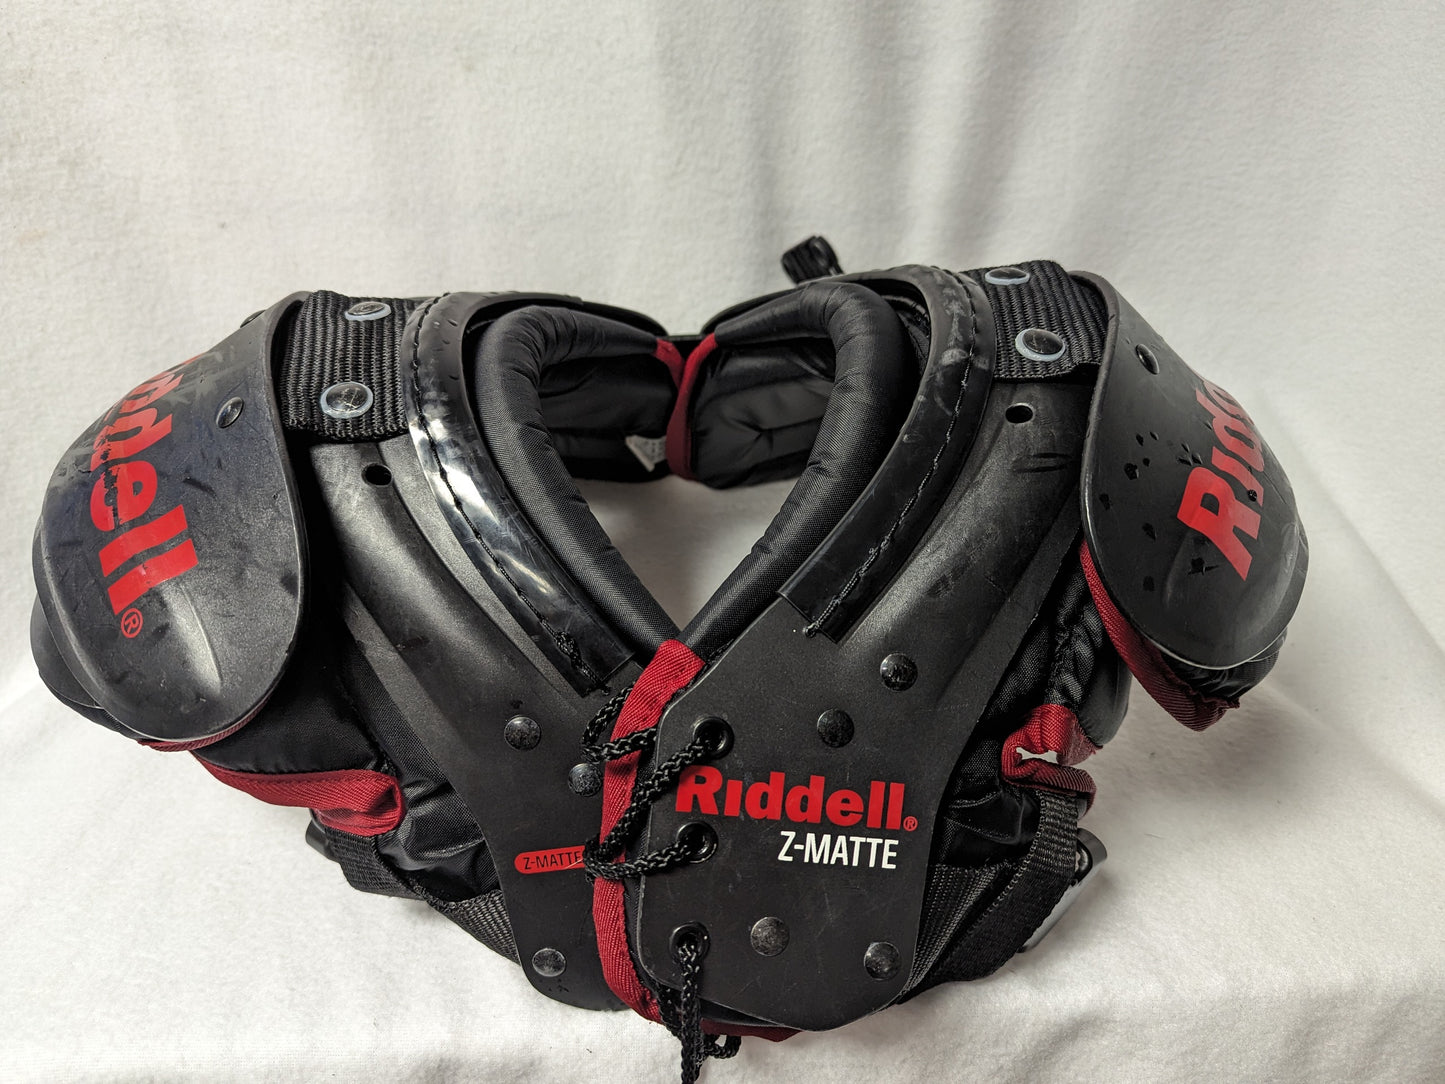 Riddell Z-Mate Youth Football Shoulder Pads Size Youth XS Color Black Condition Used